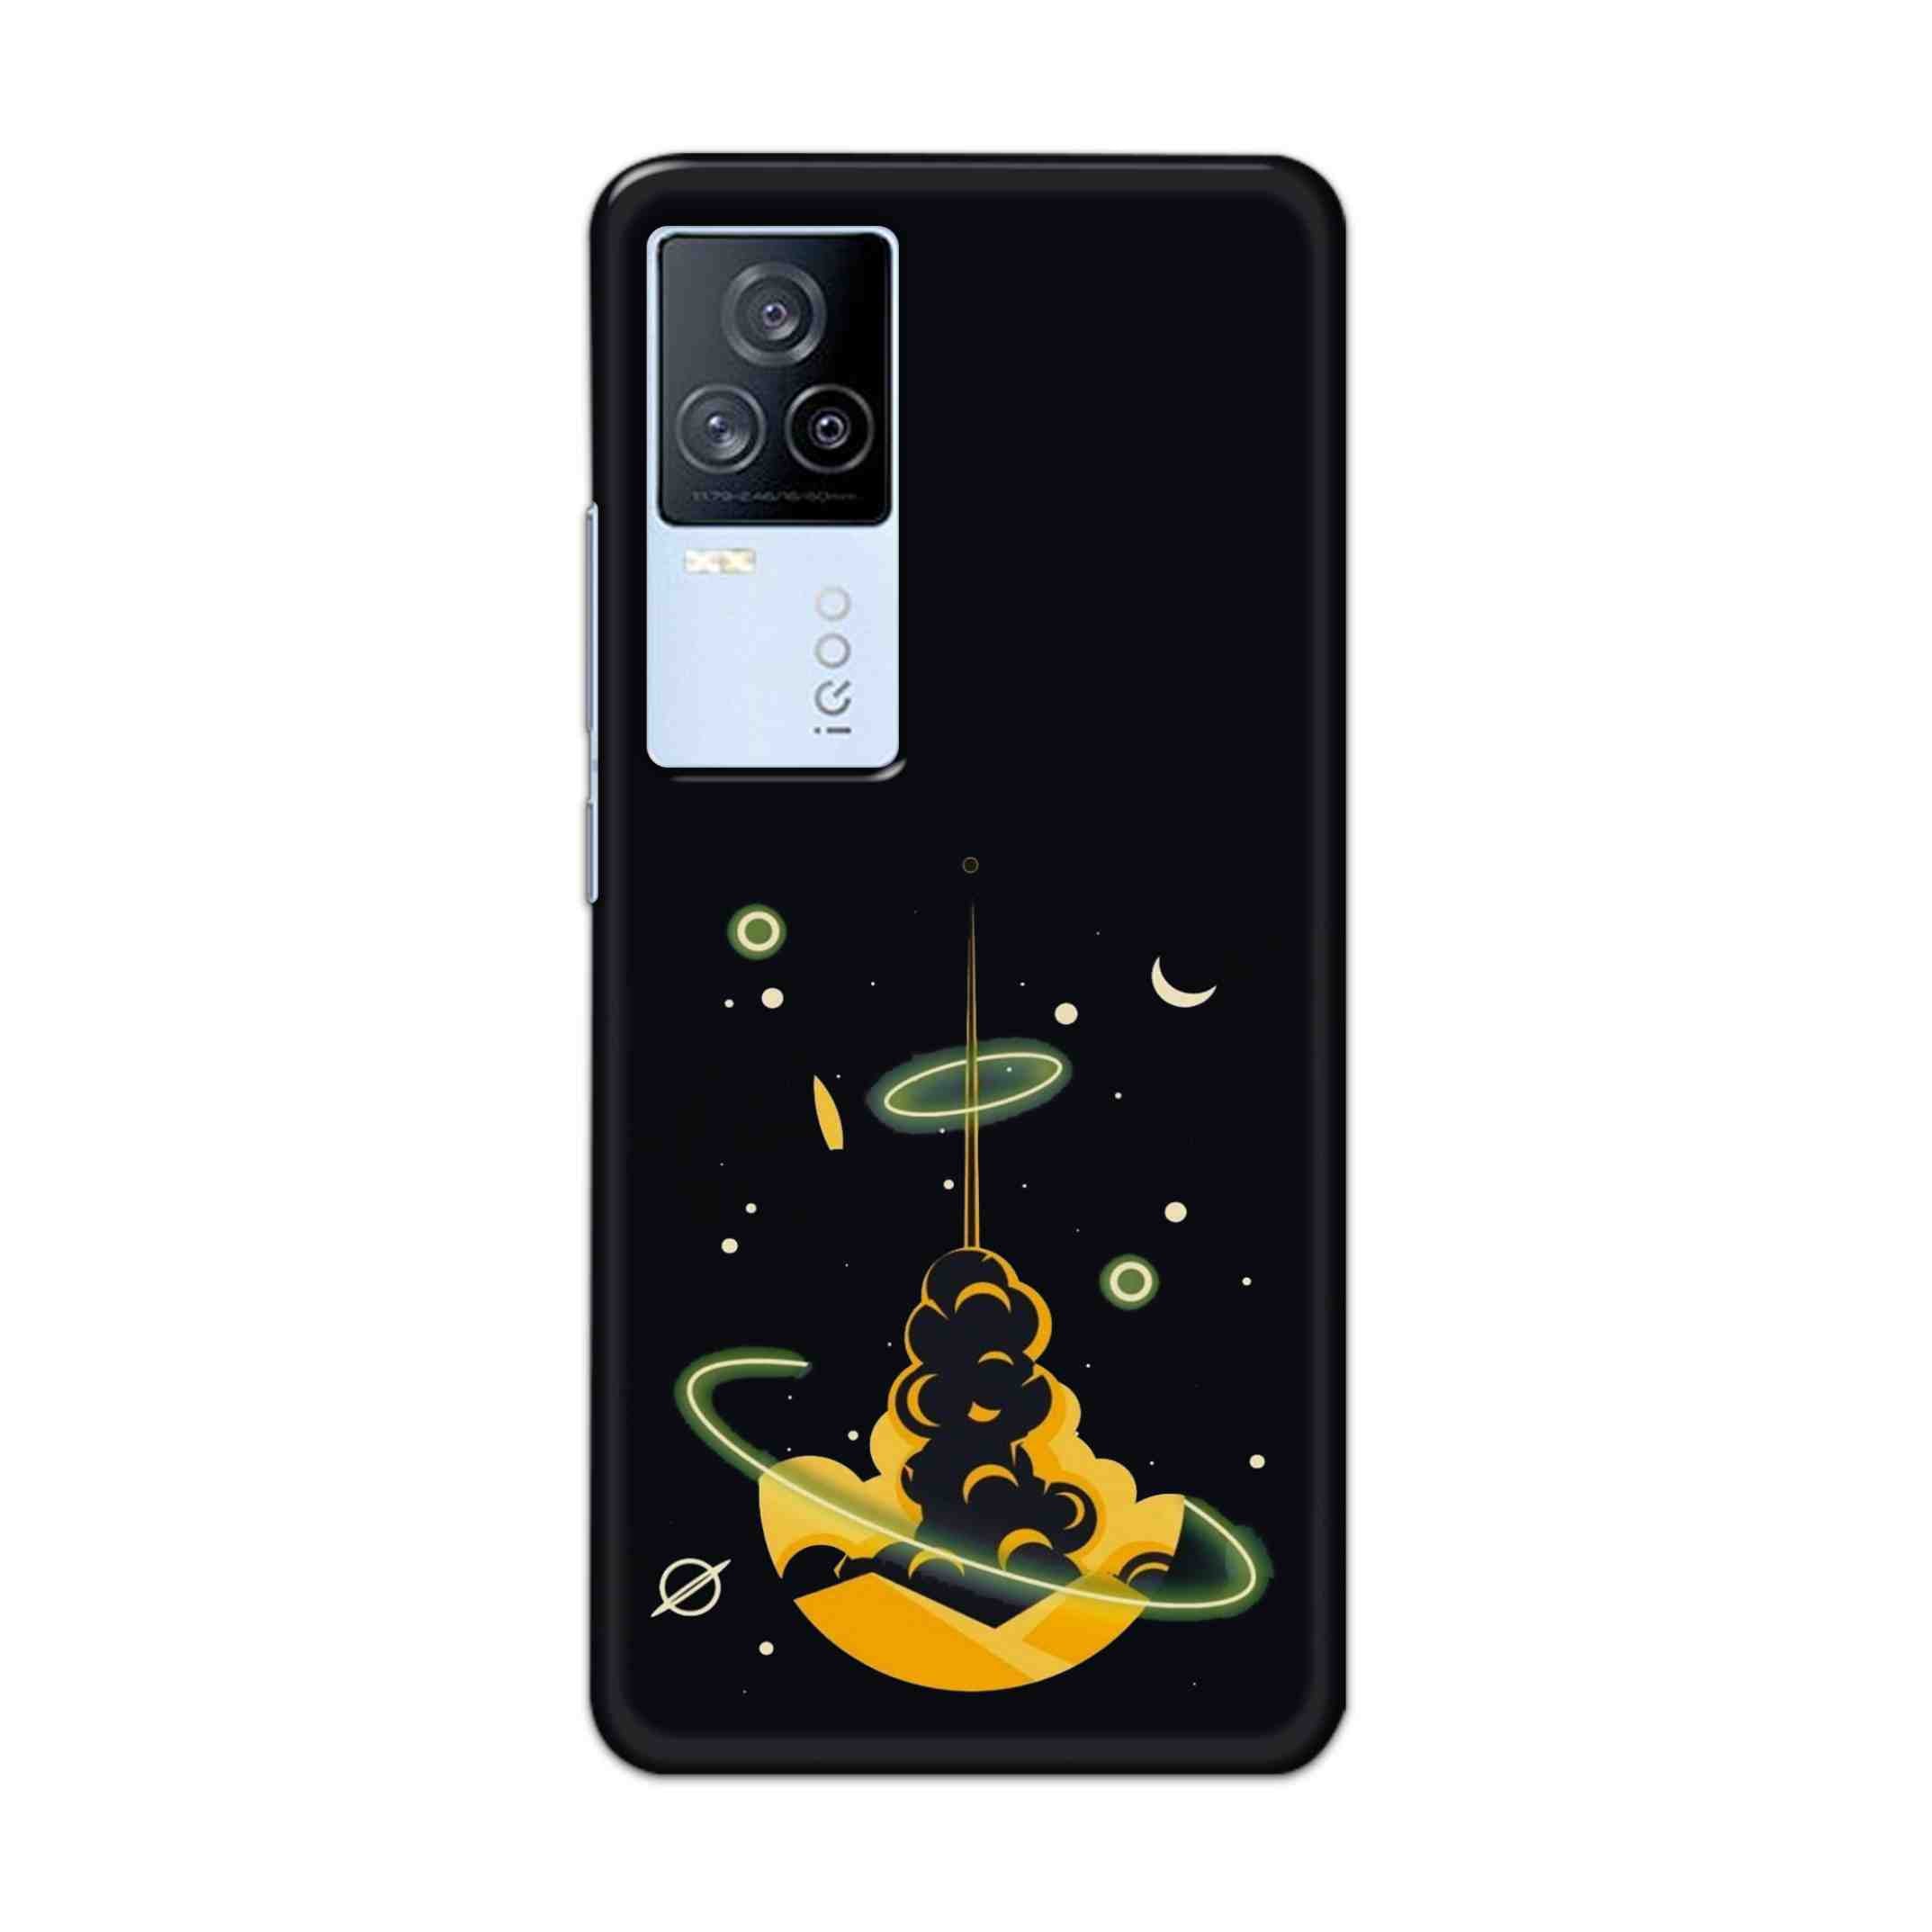 Buy Moon Hard Back Mobile Phone Case/Cover For iQOO7 Online